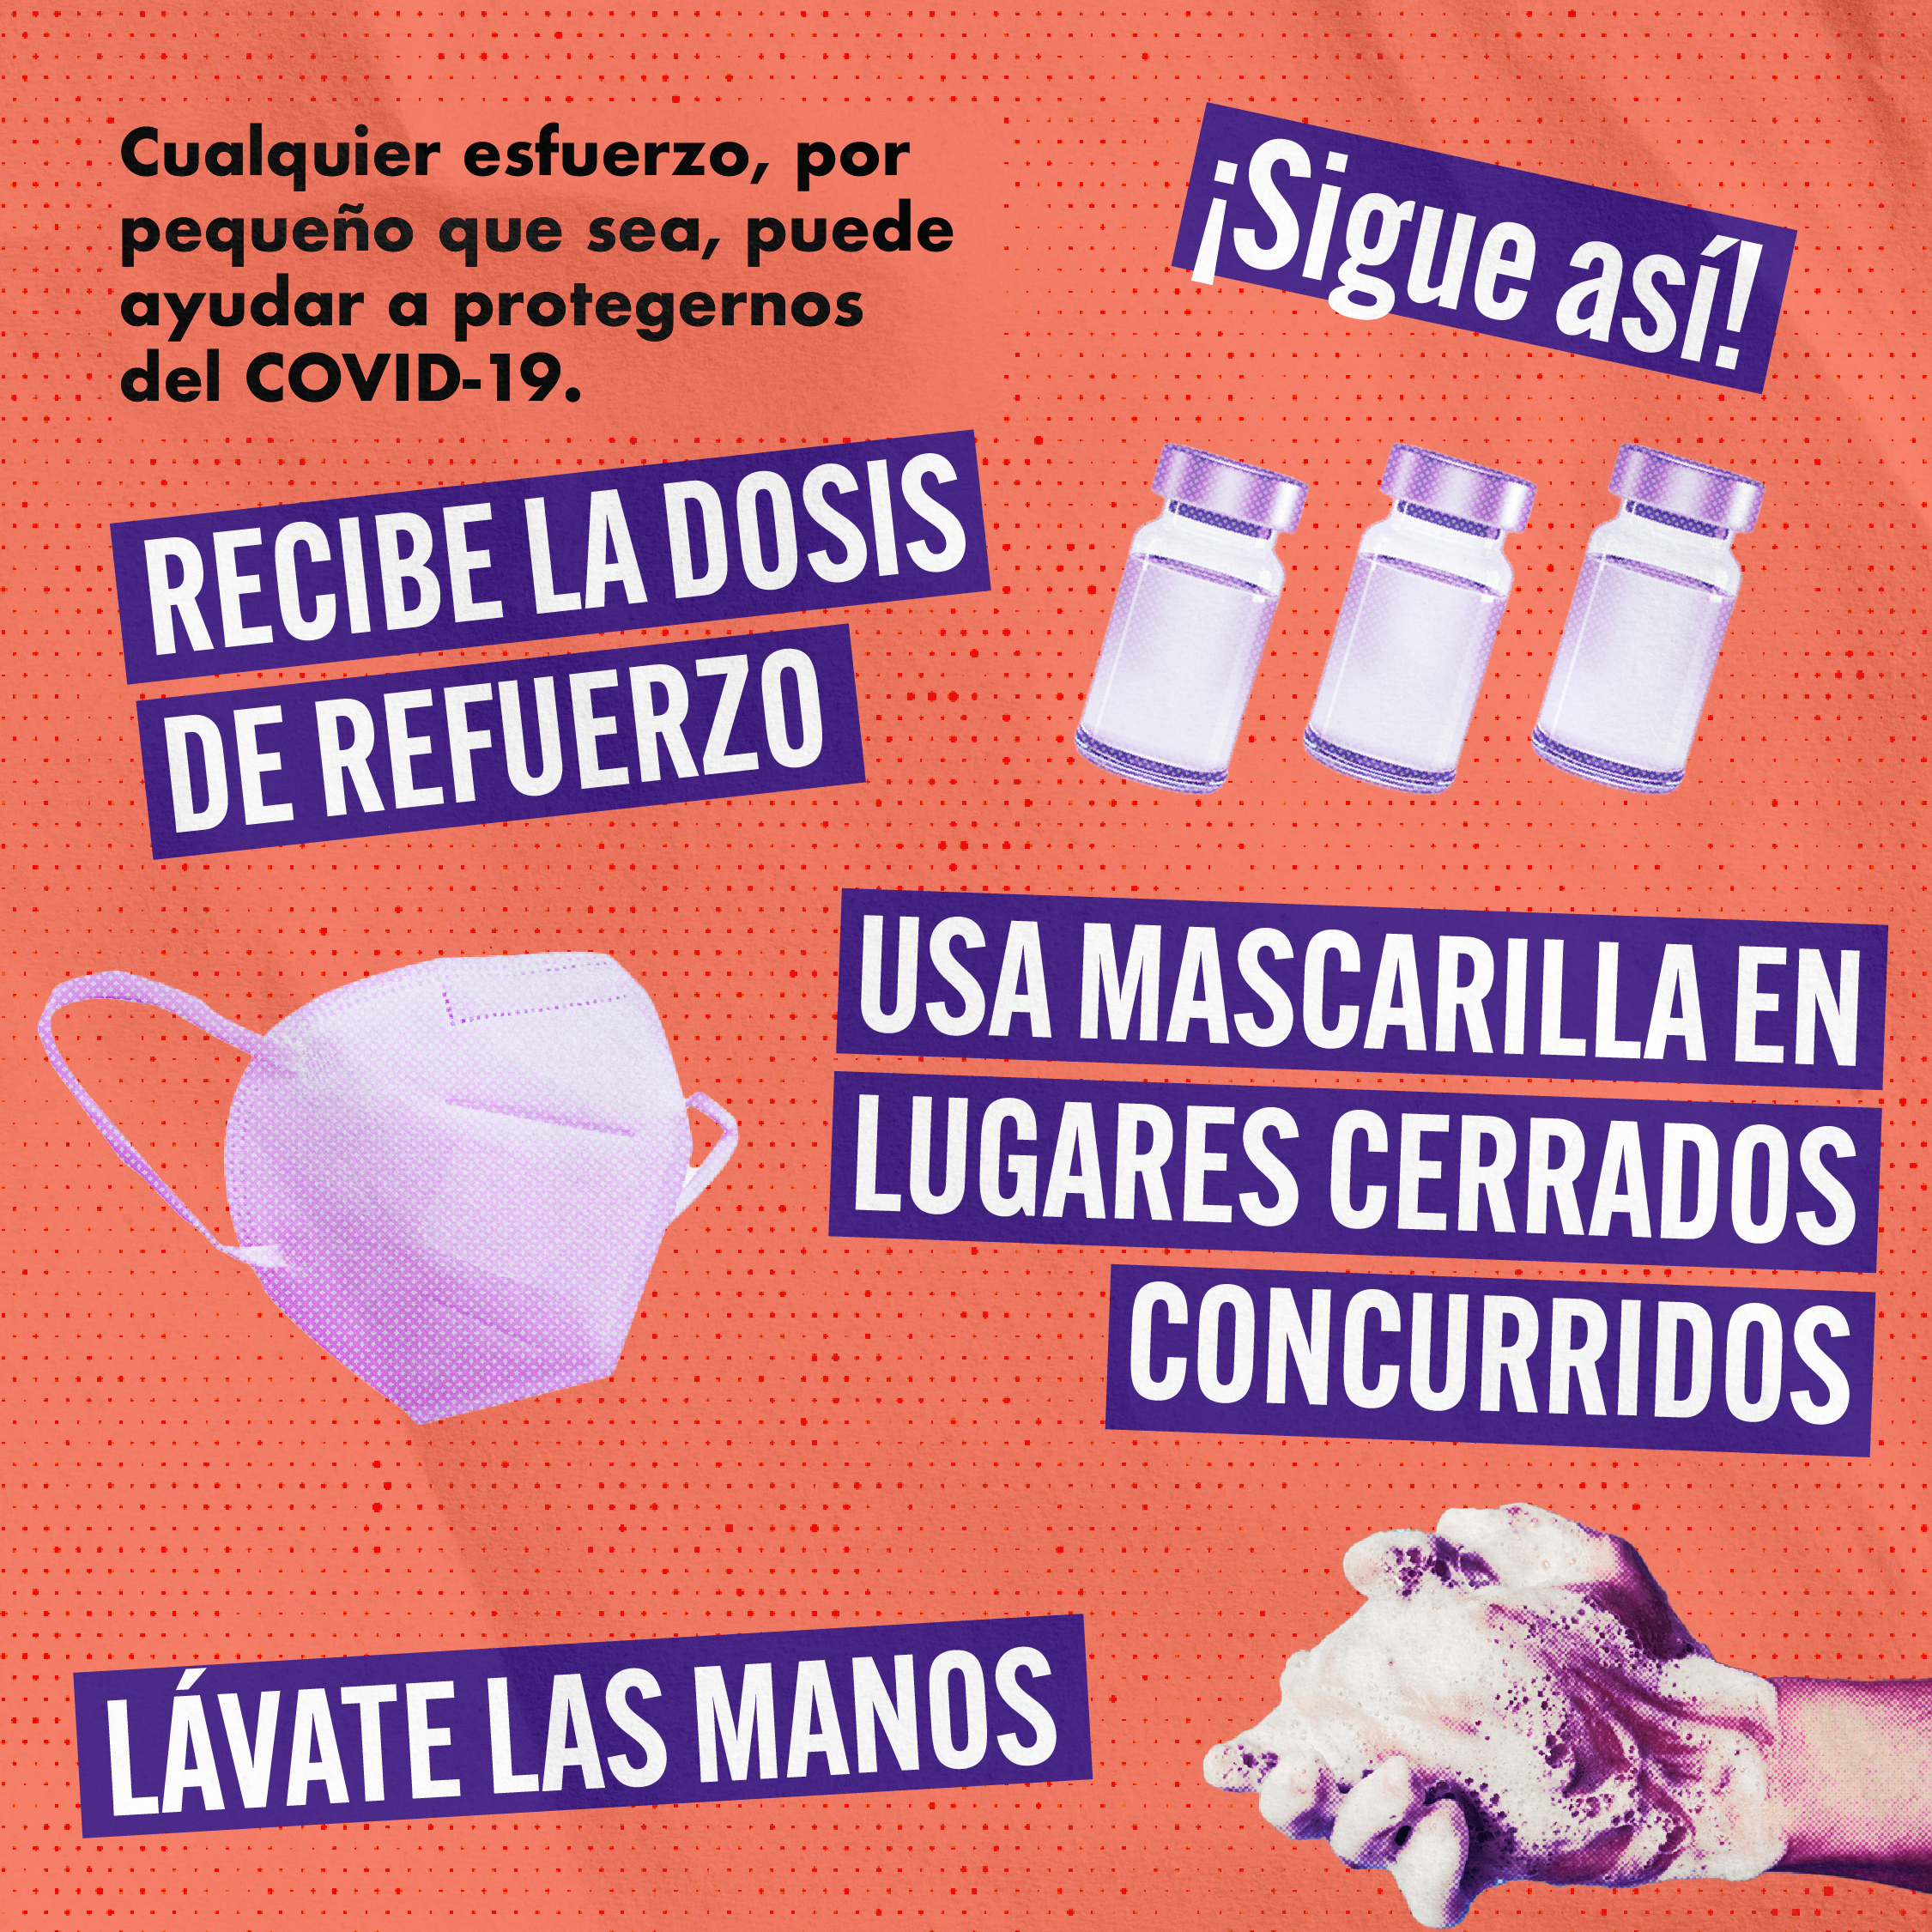 Various images surrounding text include vaccine vials, a mask, and a hand holding a soapy sponge